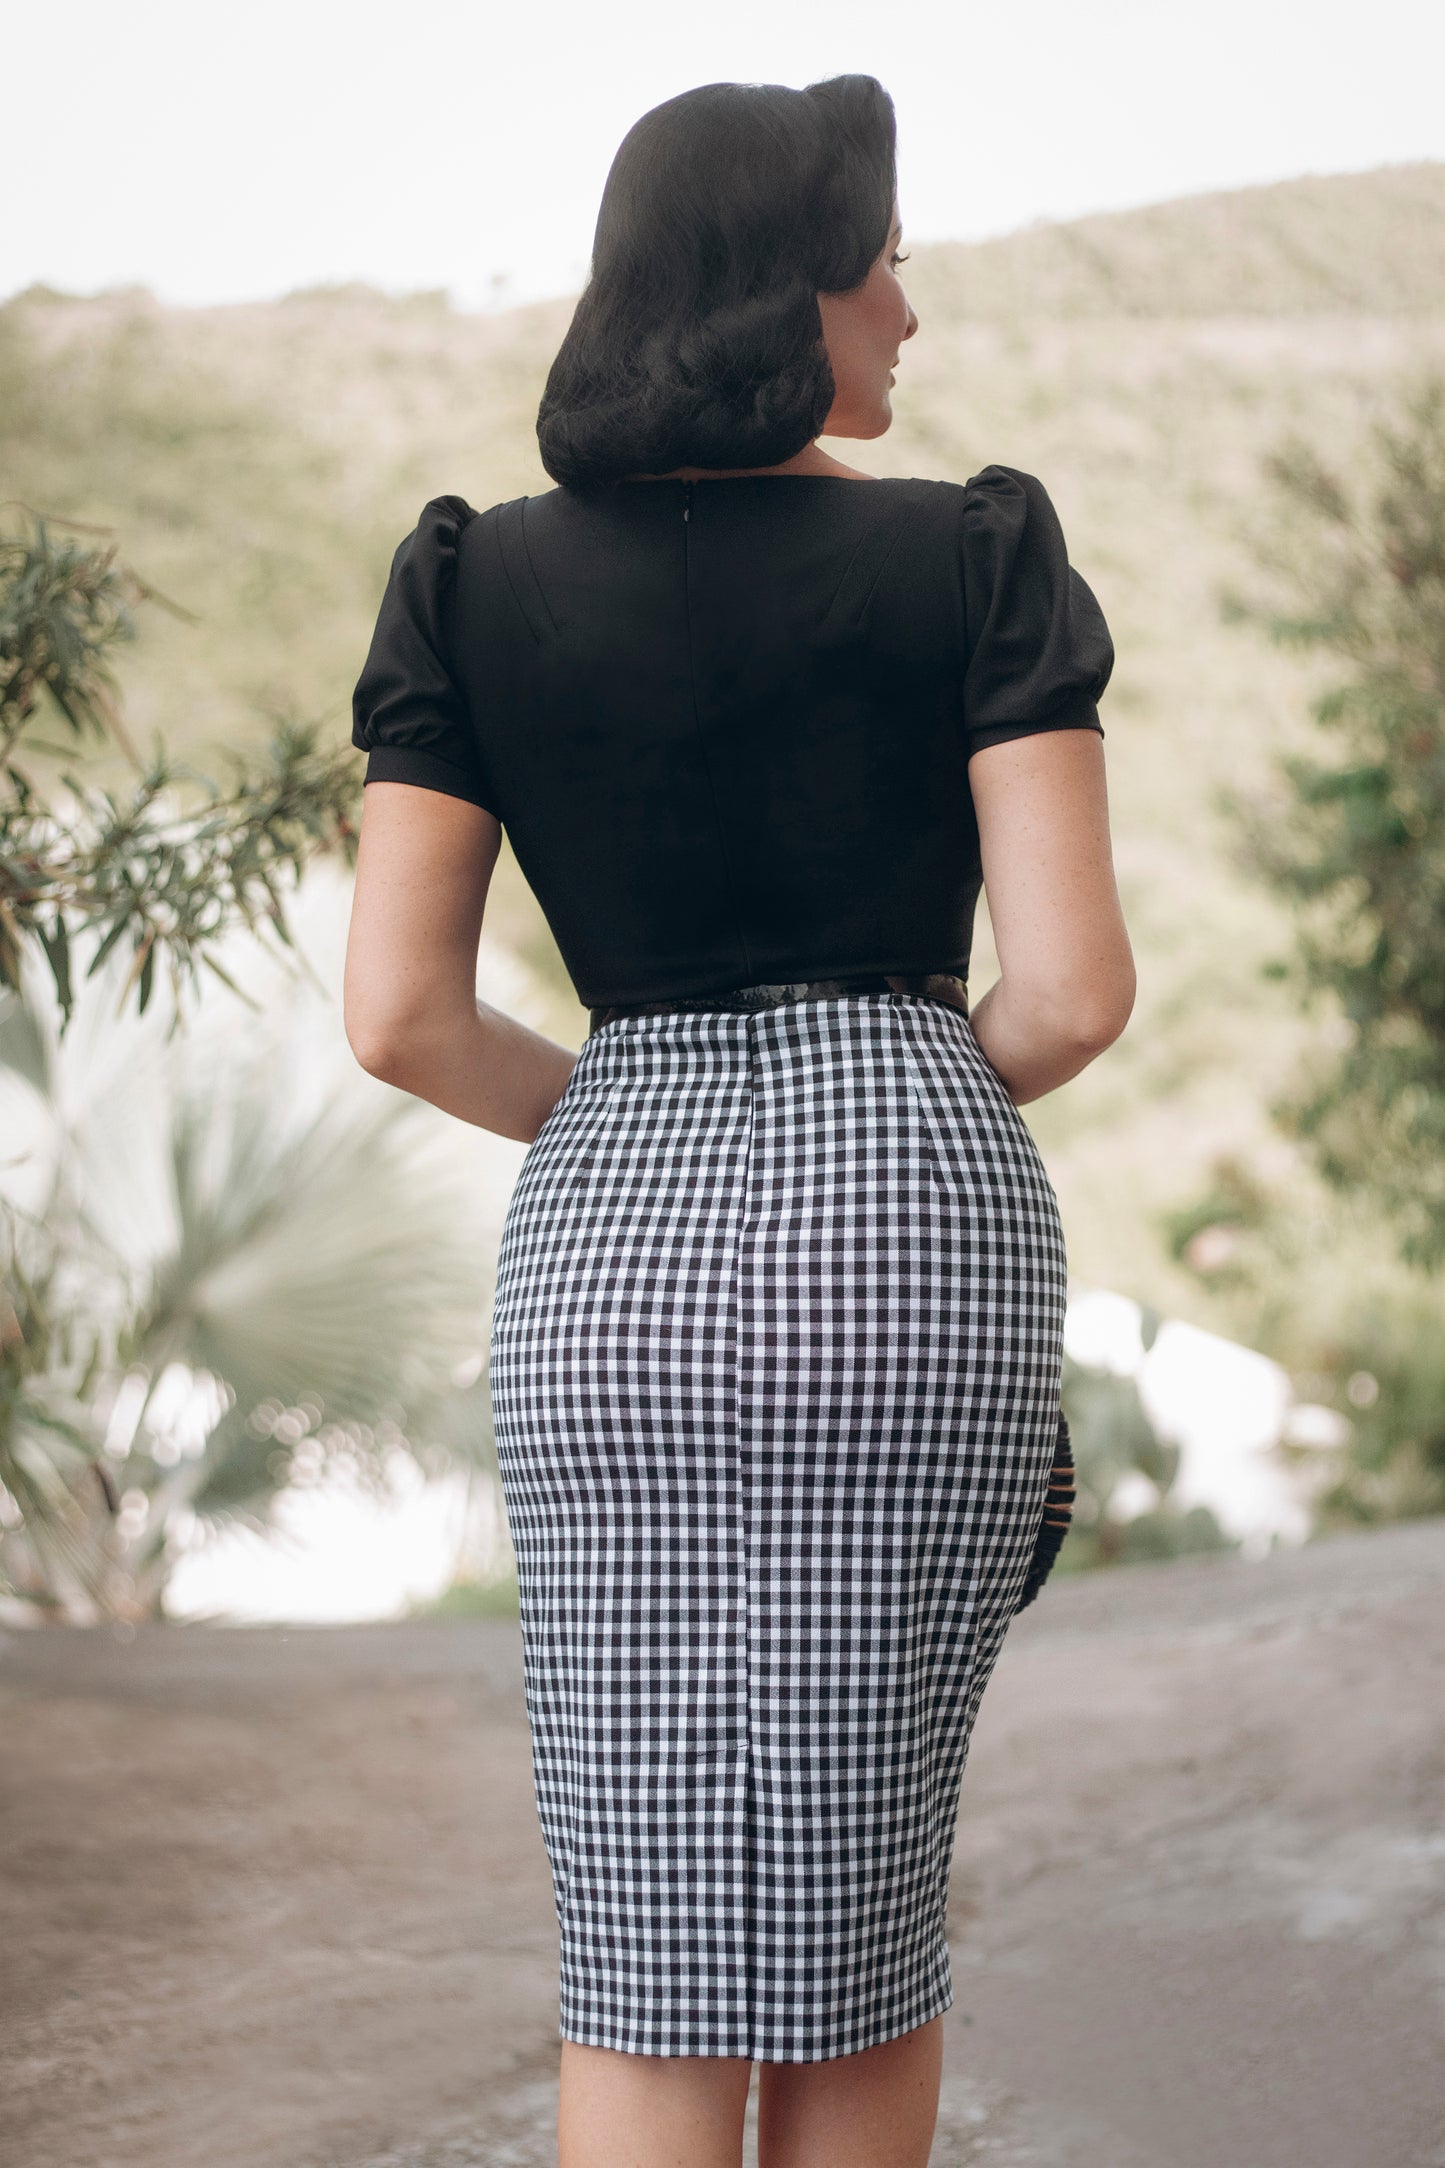 The Charisse Gingham Pencil Dress in Black and White